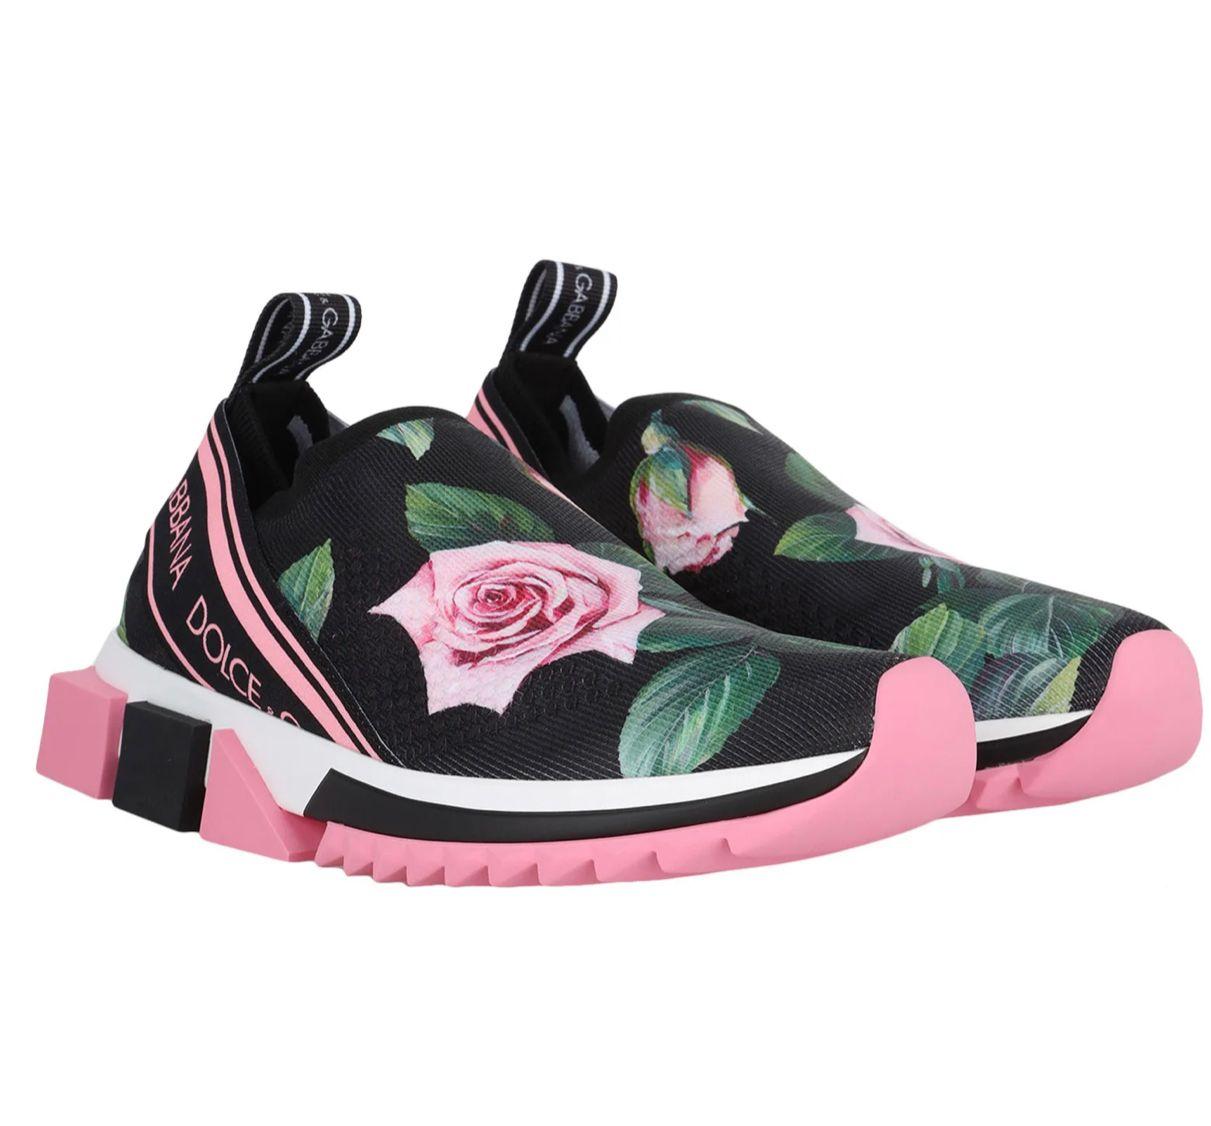 Dolce & Gabbana Tropical Rose stretch knit sock sneakers with roses print all-over. Elastic band with logo on the back, jacquard tab, fabric lining, removable leather insole, rubber sole with contrast inserts. 
Composition:
75% polyester 10%